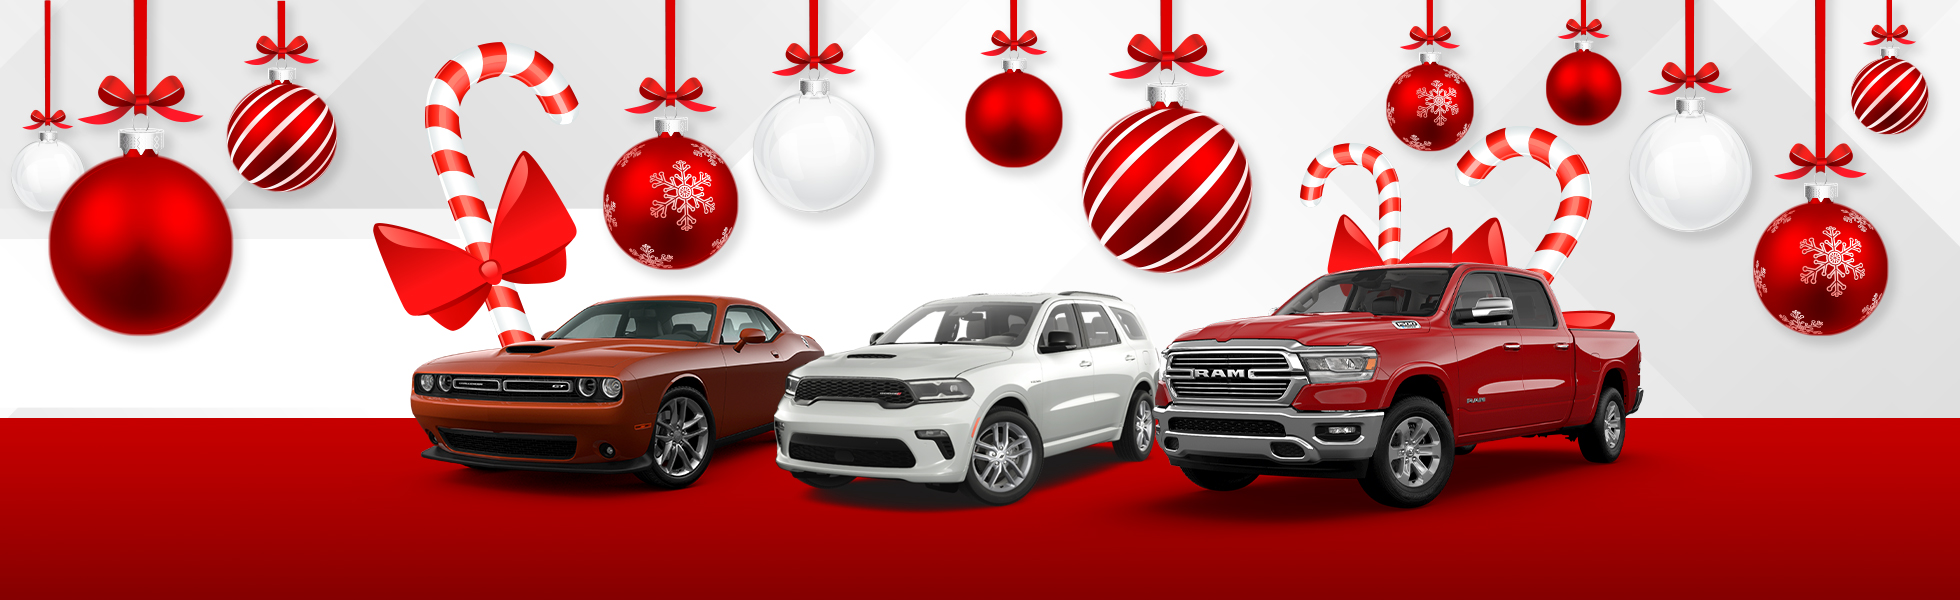 Holiday Sales Event banner featuring Chrysler, Dodge, Jeep and Ram models on display on a decorative winter holiday background